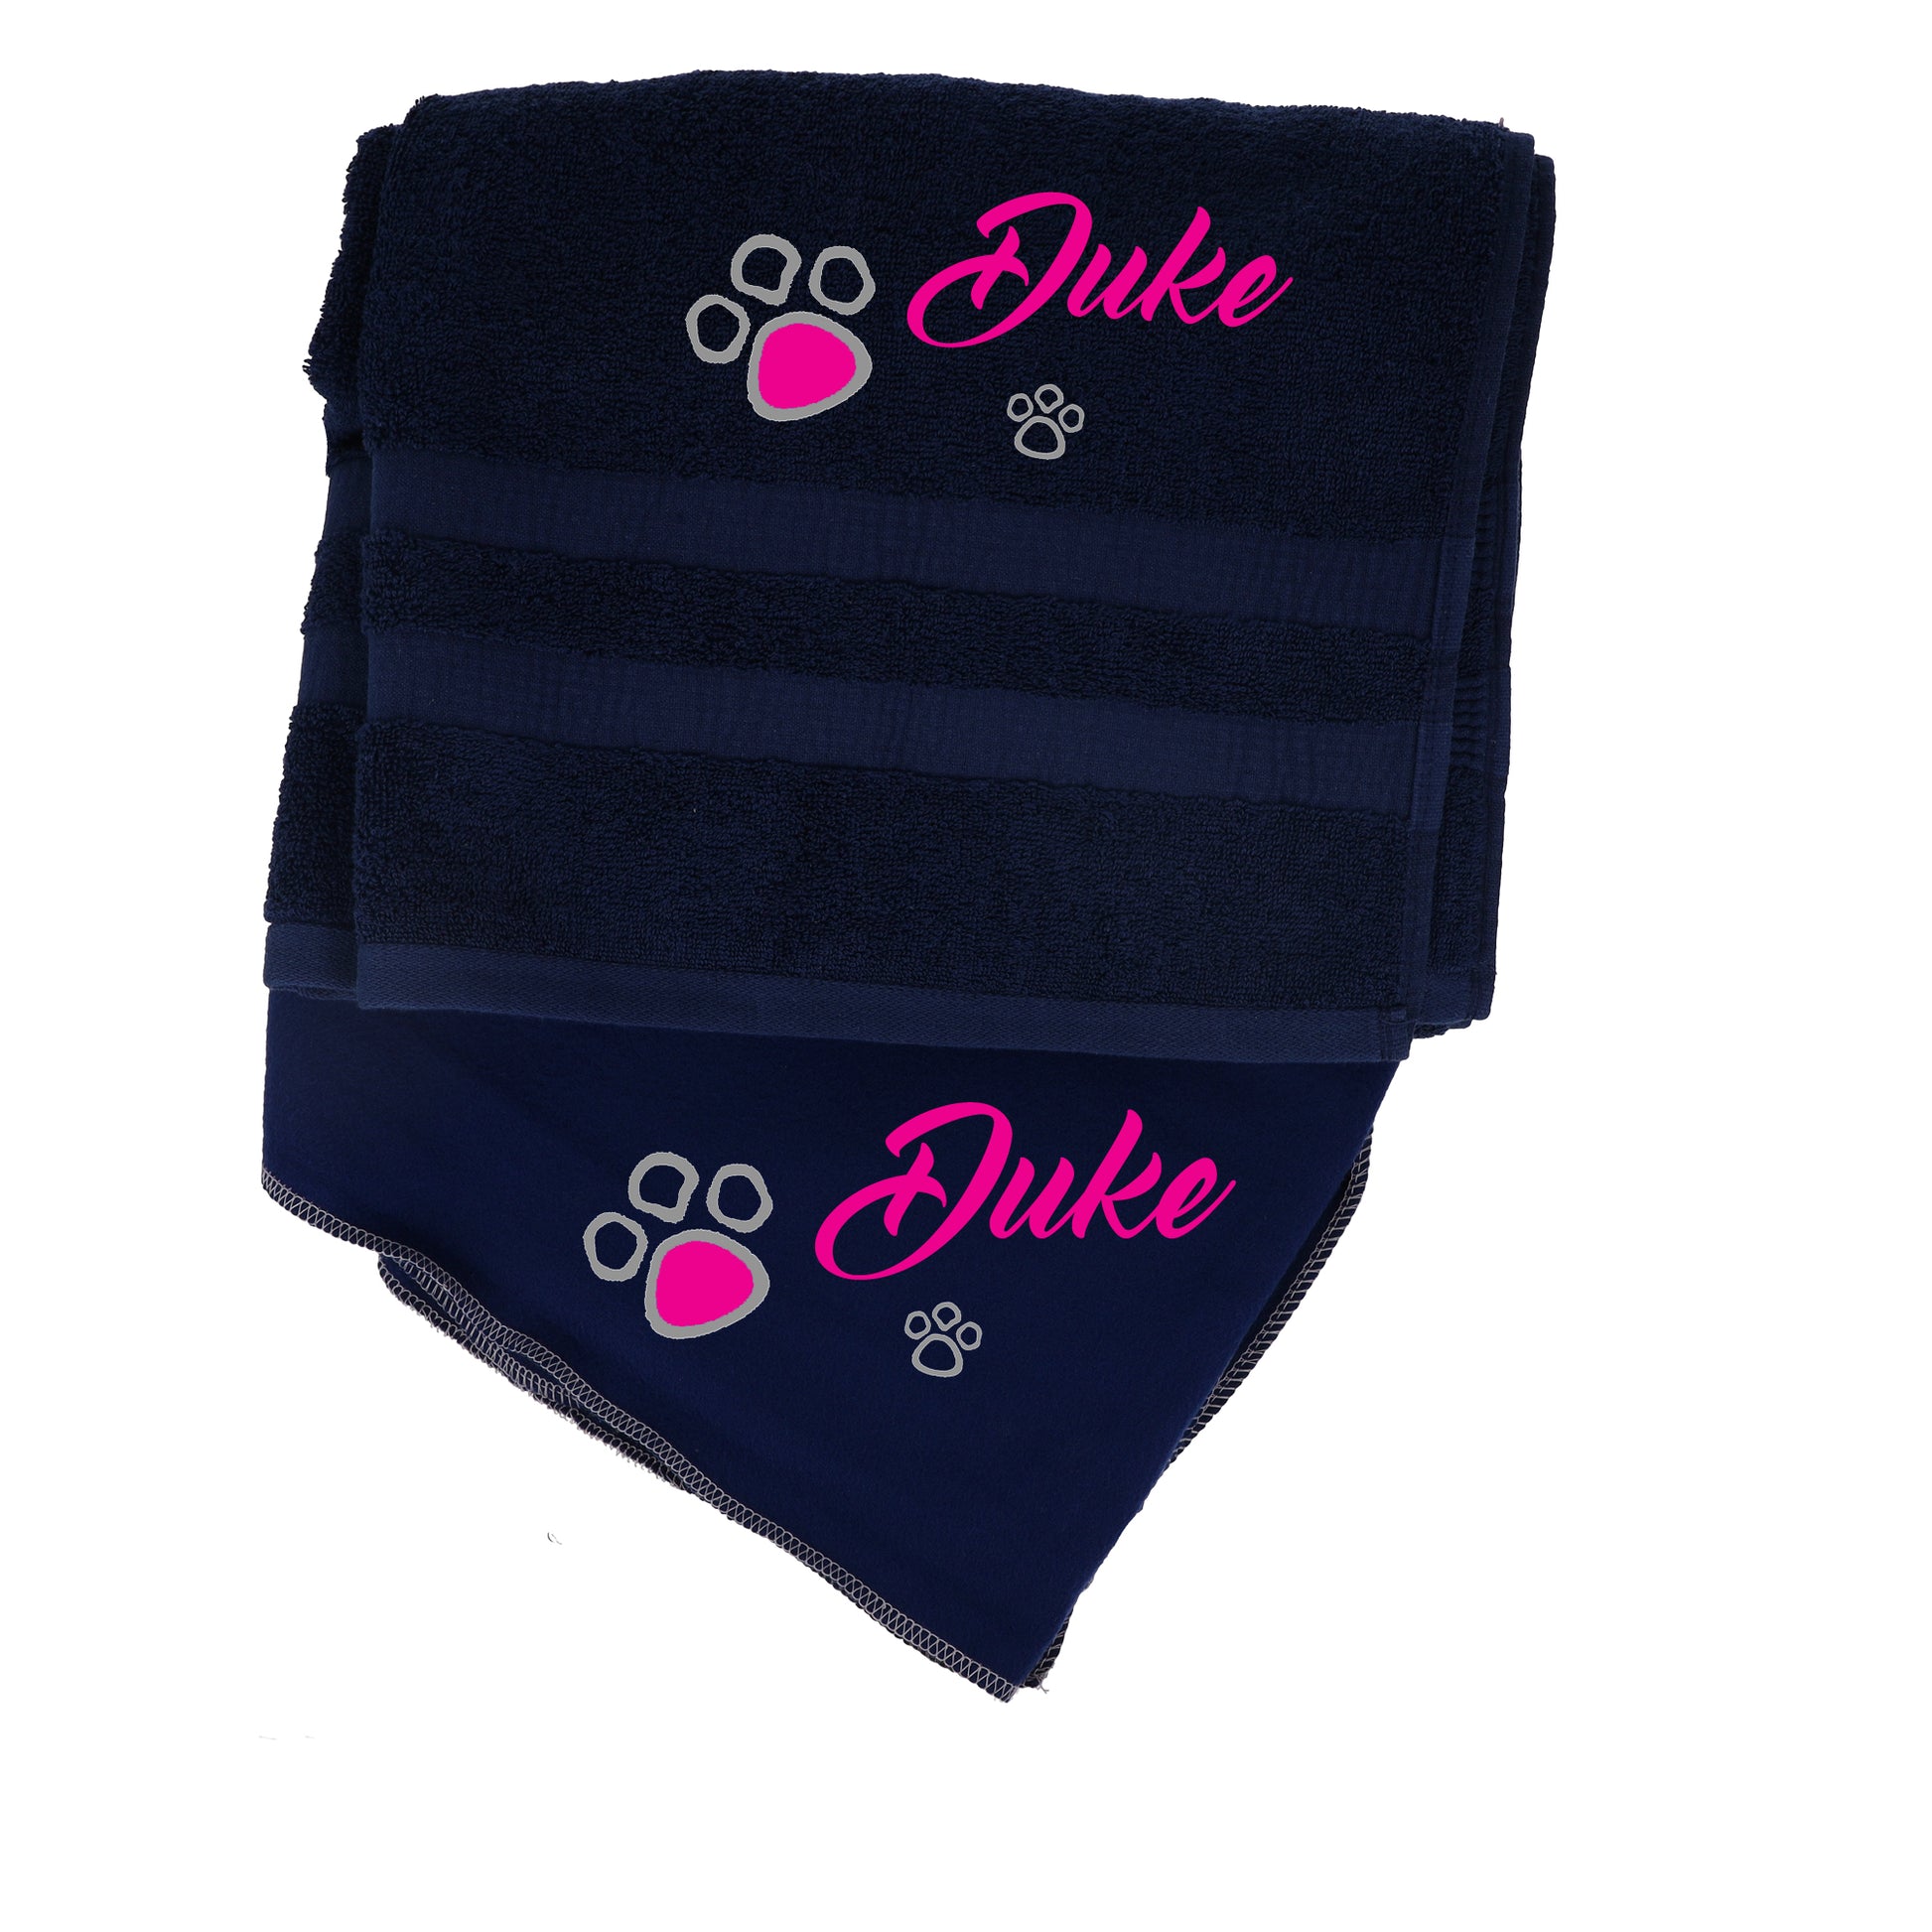 Personalised Dog Blanket and Towel Embroidered With Name Pampered Pooch Gift Set  - Always Looking Good -   